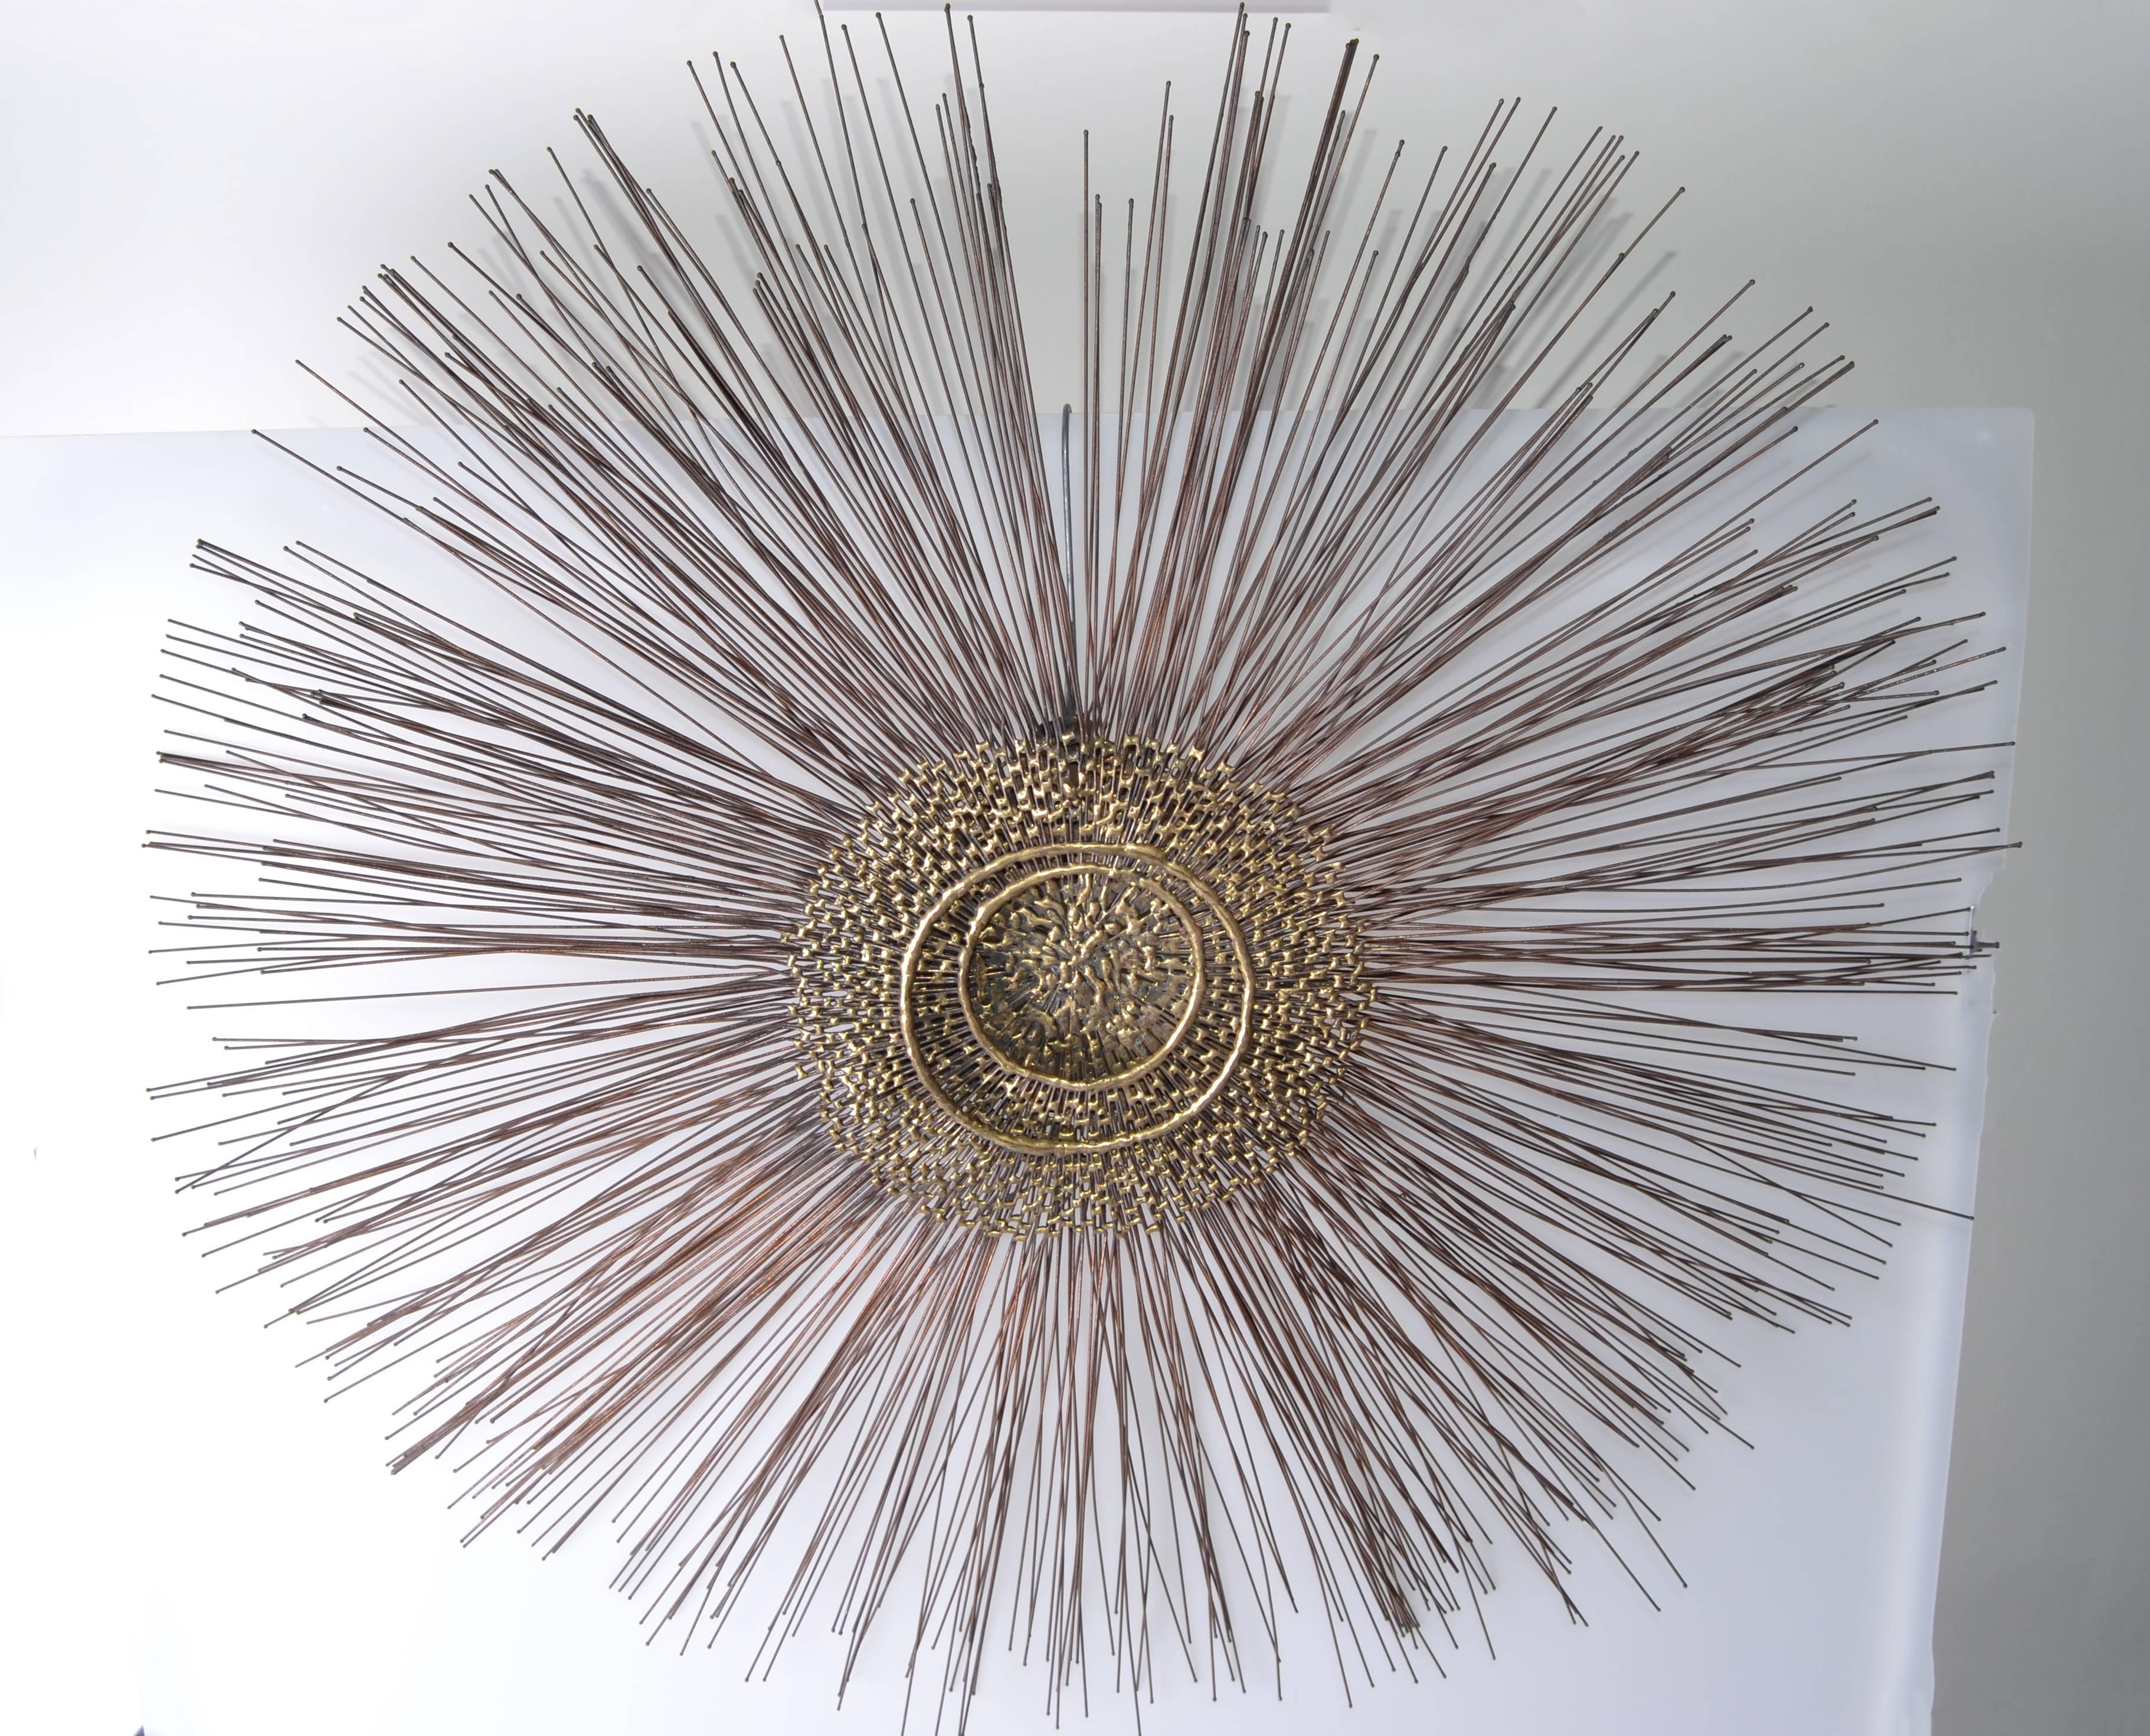 Striking 1960 soldered brass sunburst sculpture in the Style of Curtis Jere. Wonderful Mid-Century Modern three-layer sunburst metal sculpture with molten center. Hues of brass copper and black are all visible through the layers condition. No